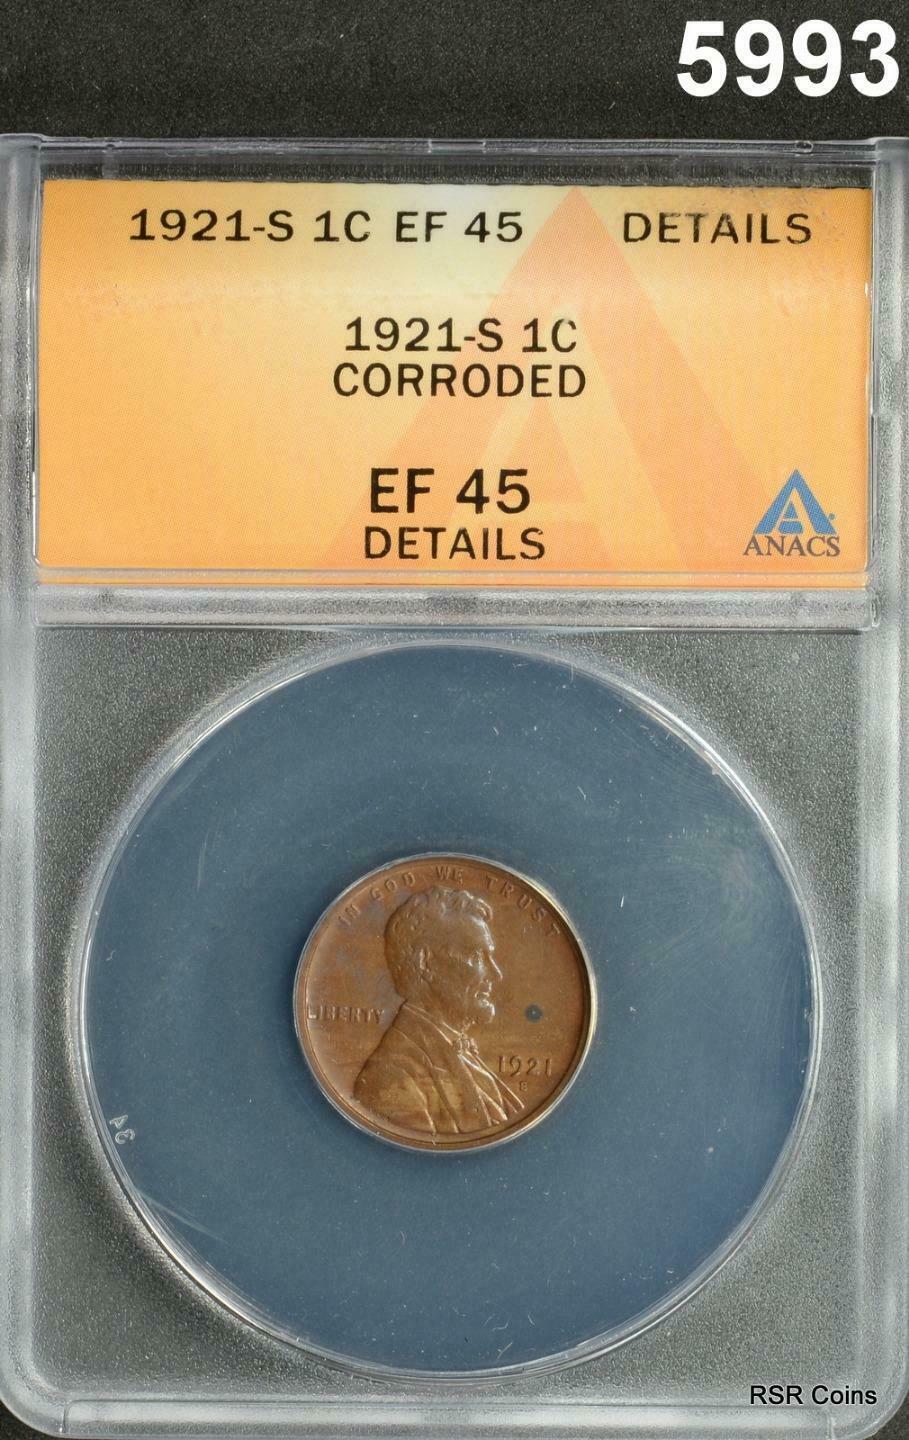 1921 S LINCOLN CENT ANACS CERTIFIED EF45 CORRODED #5993